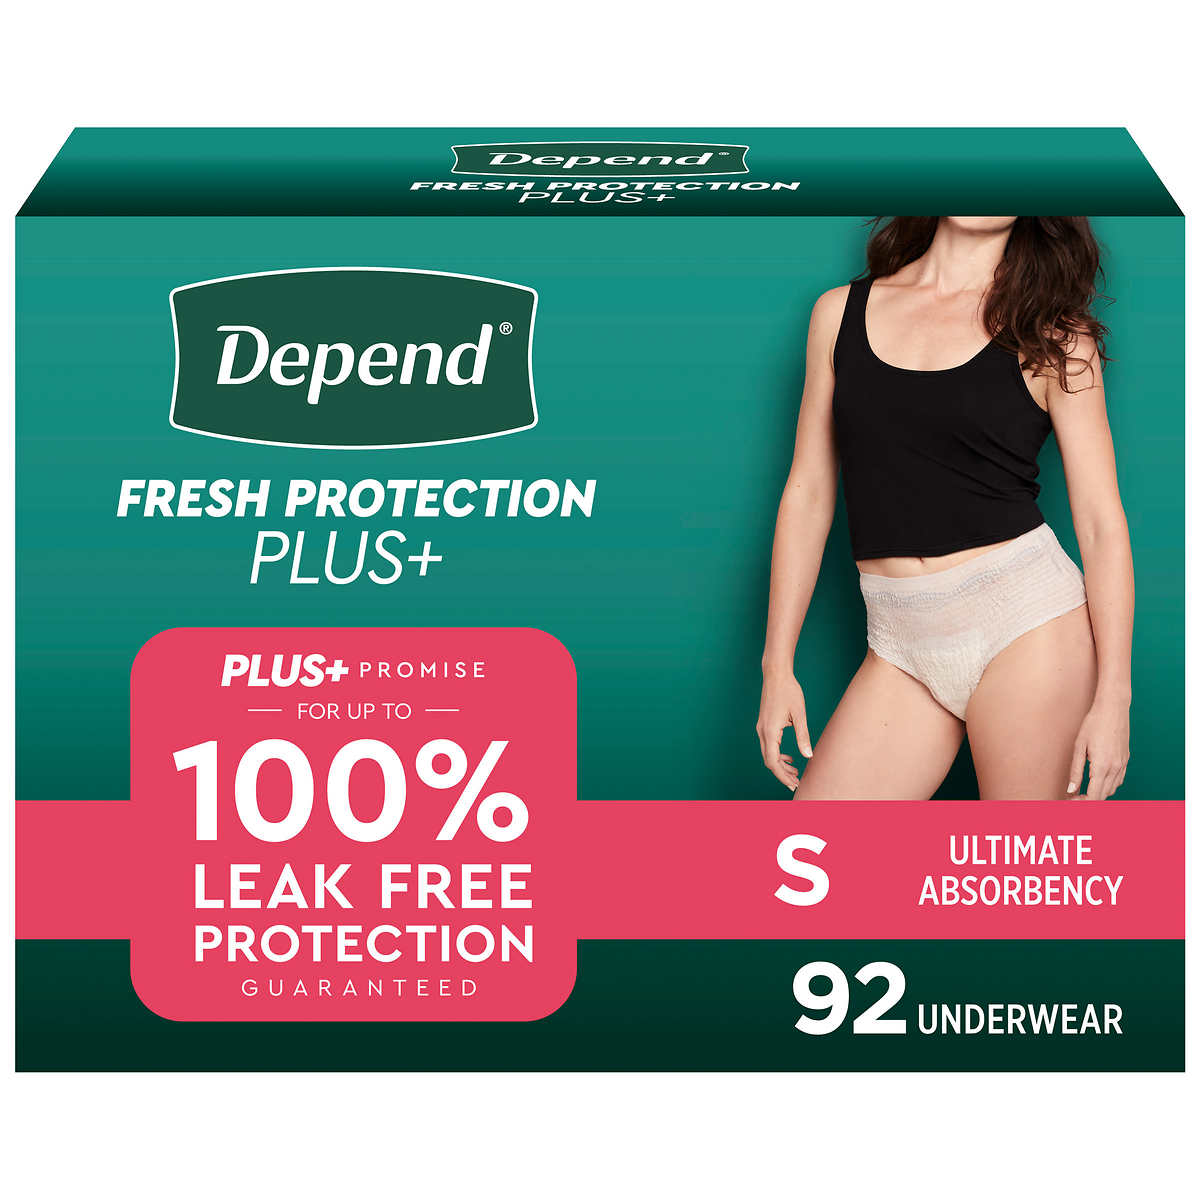 Save on Depend Women's Night Defense Incontinence Underwear Blush L Order  Online Delivery